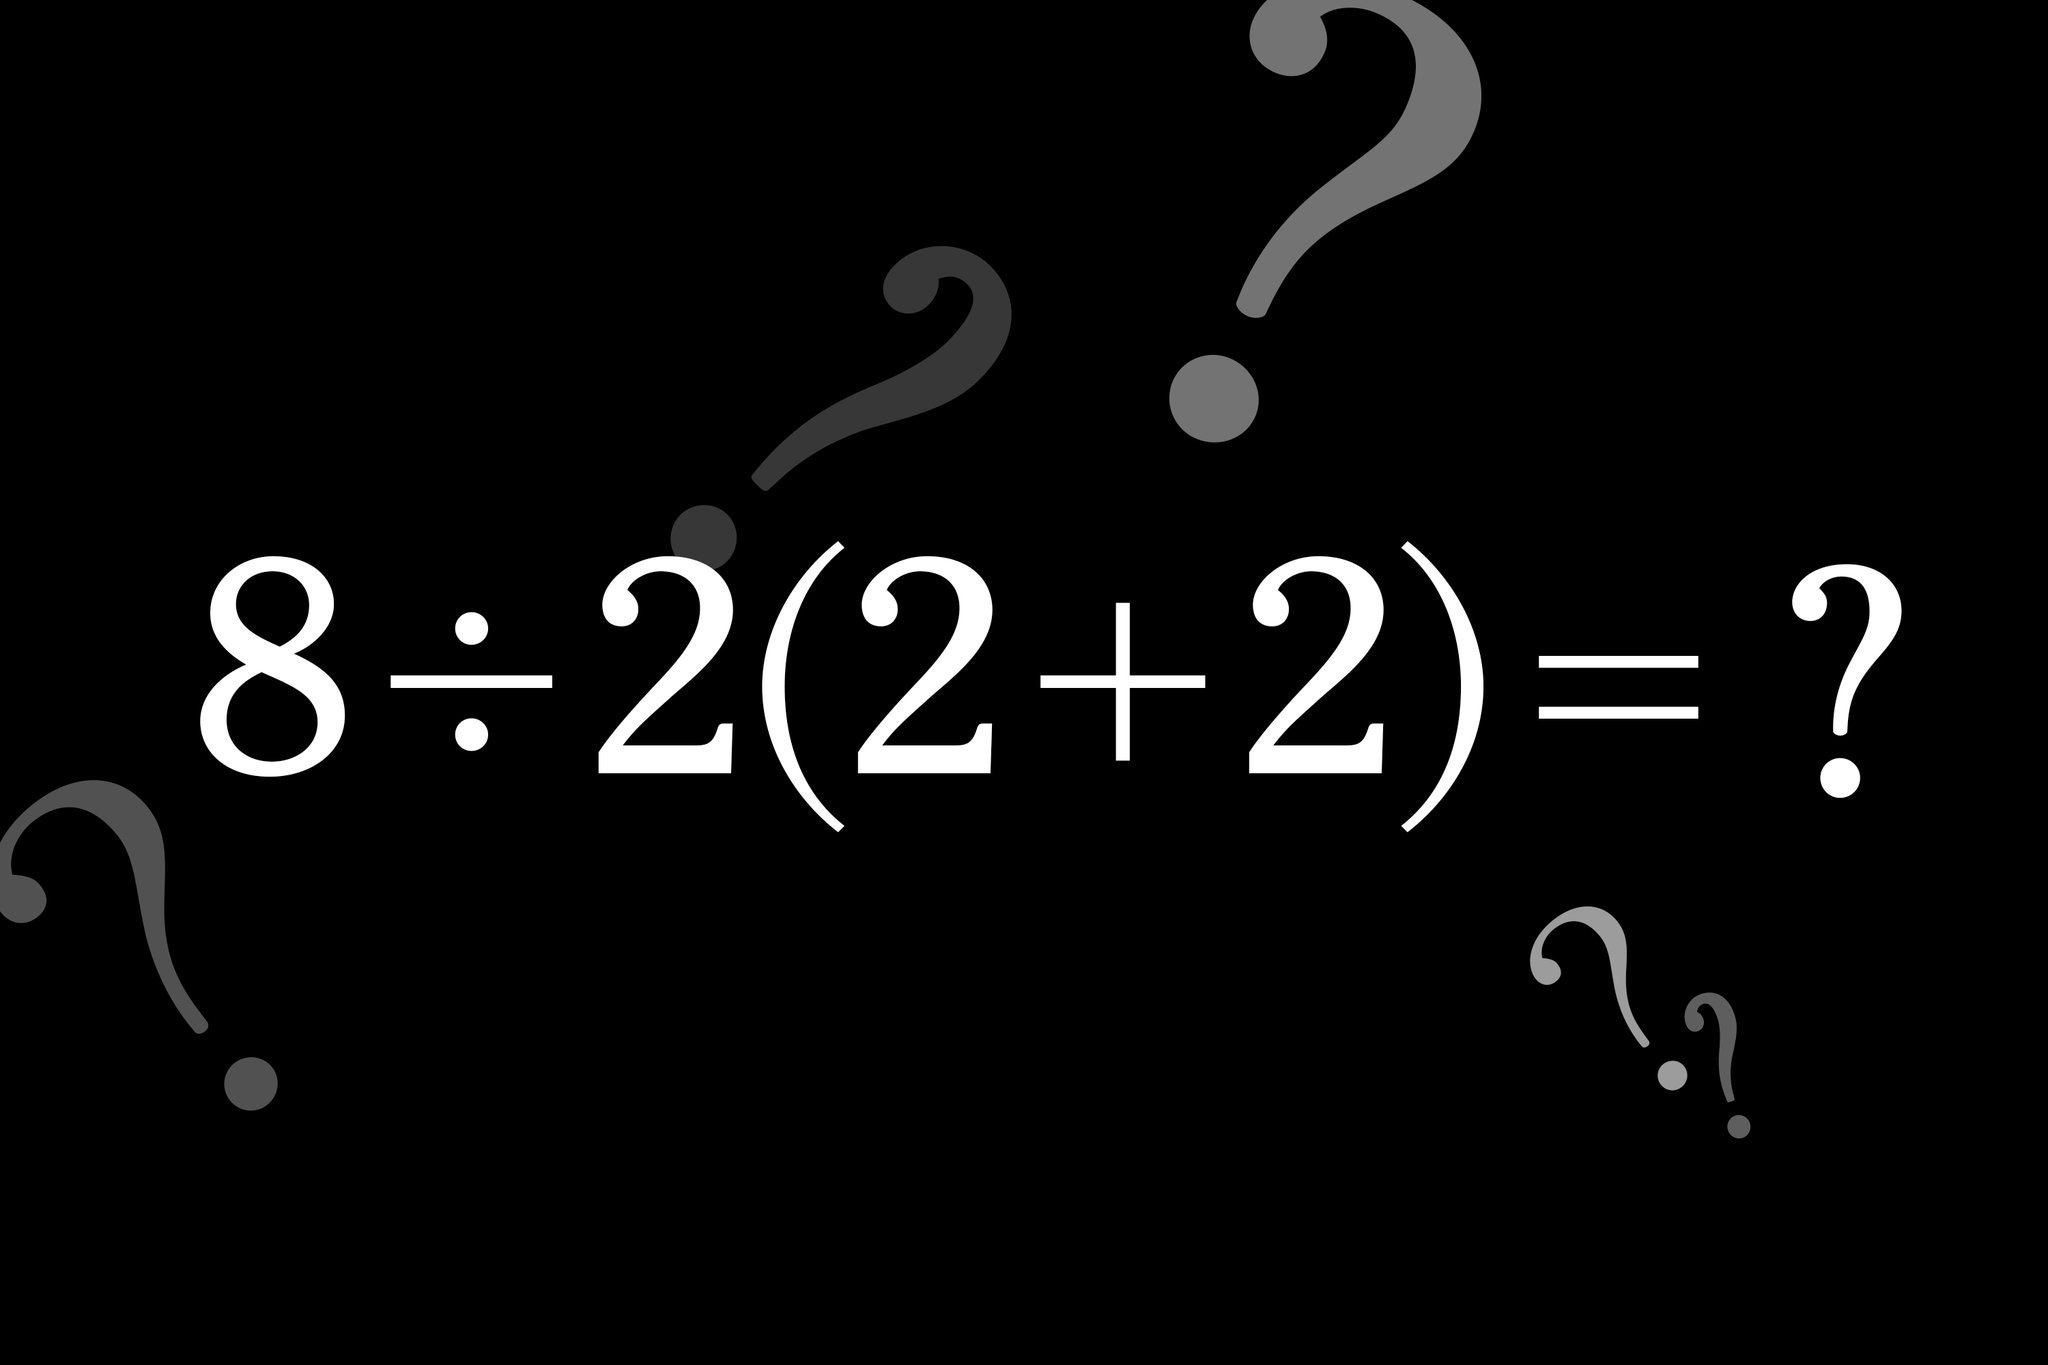 viral-math-equation-that-stumped-the-internet-how-do-you-solve-this-factopic